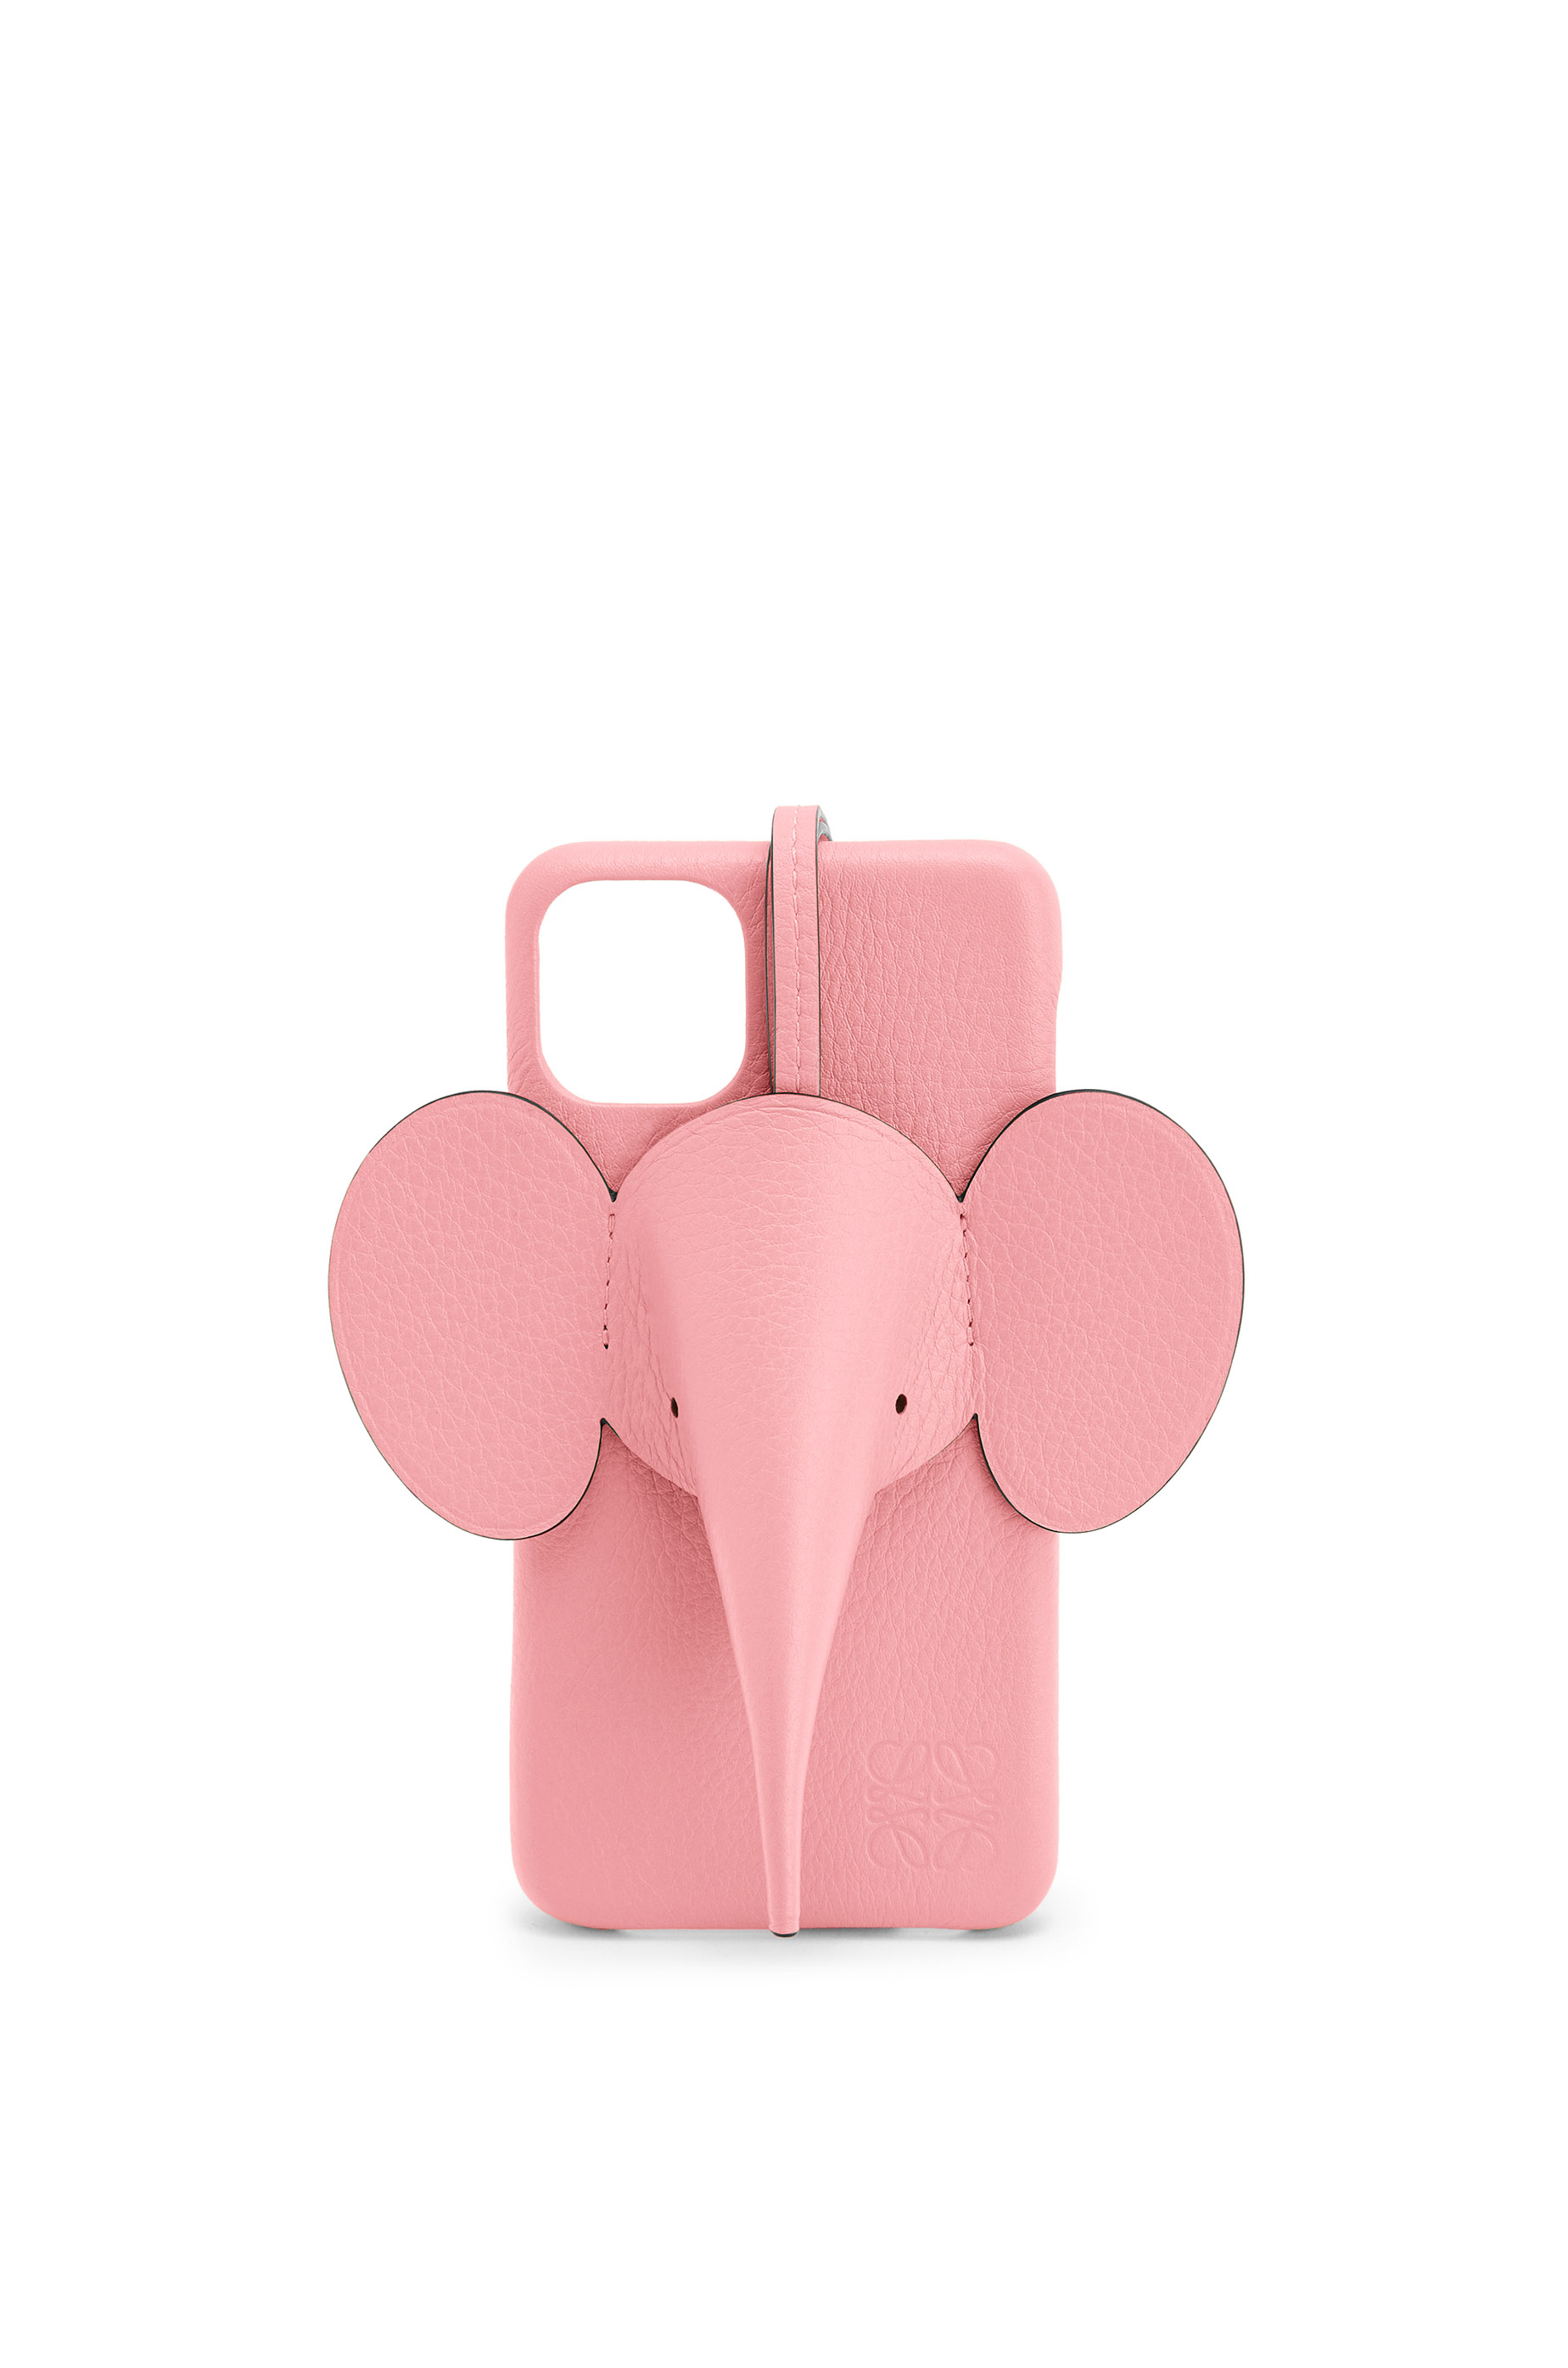 Elephant cover for iPhone 11 Pro Max in 